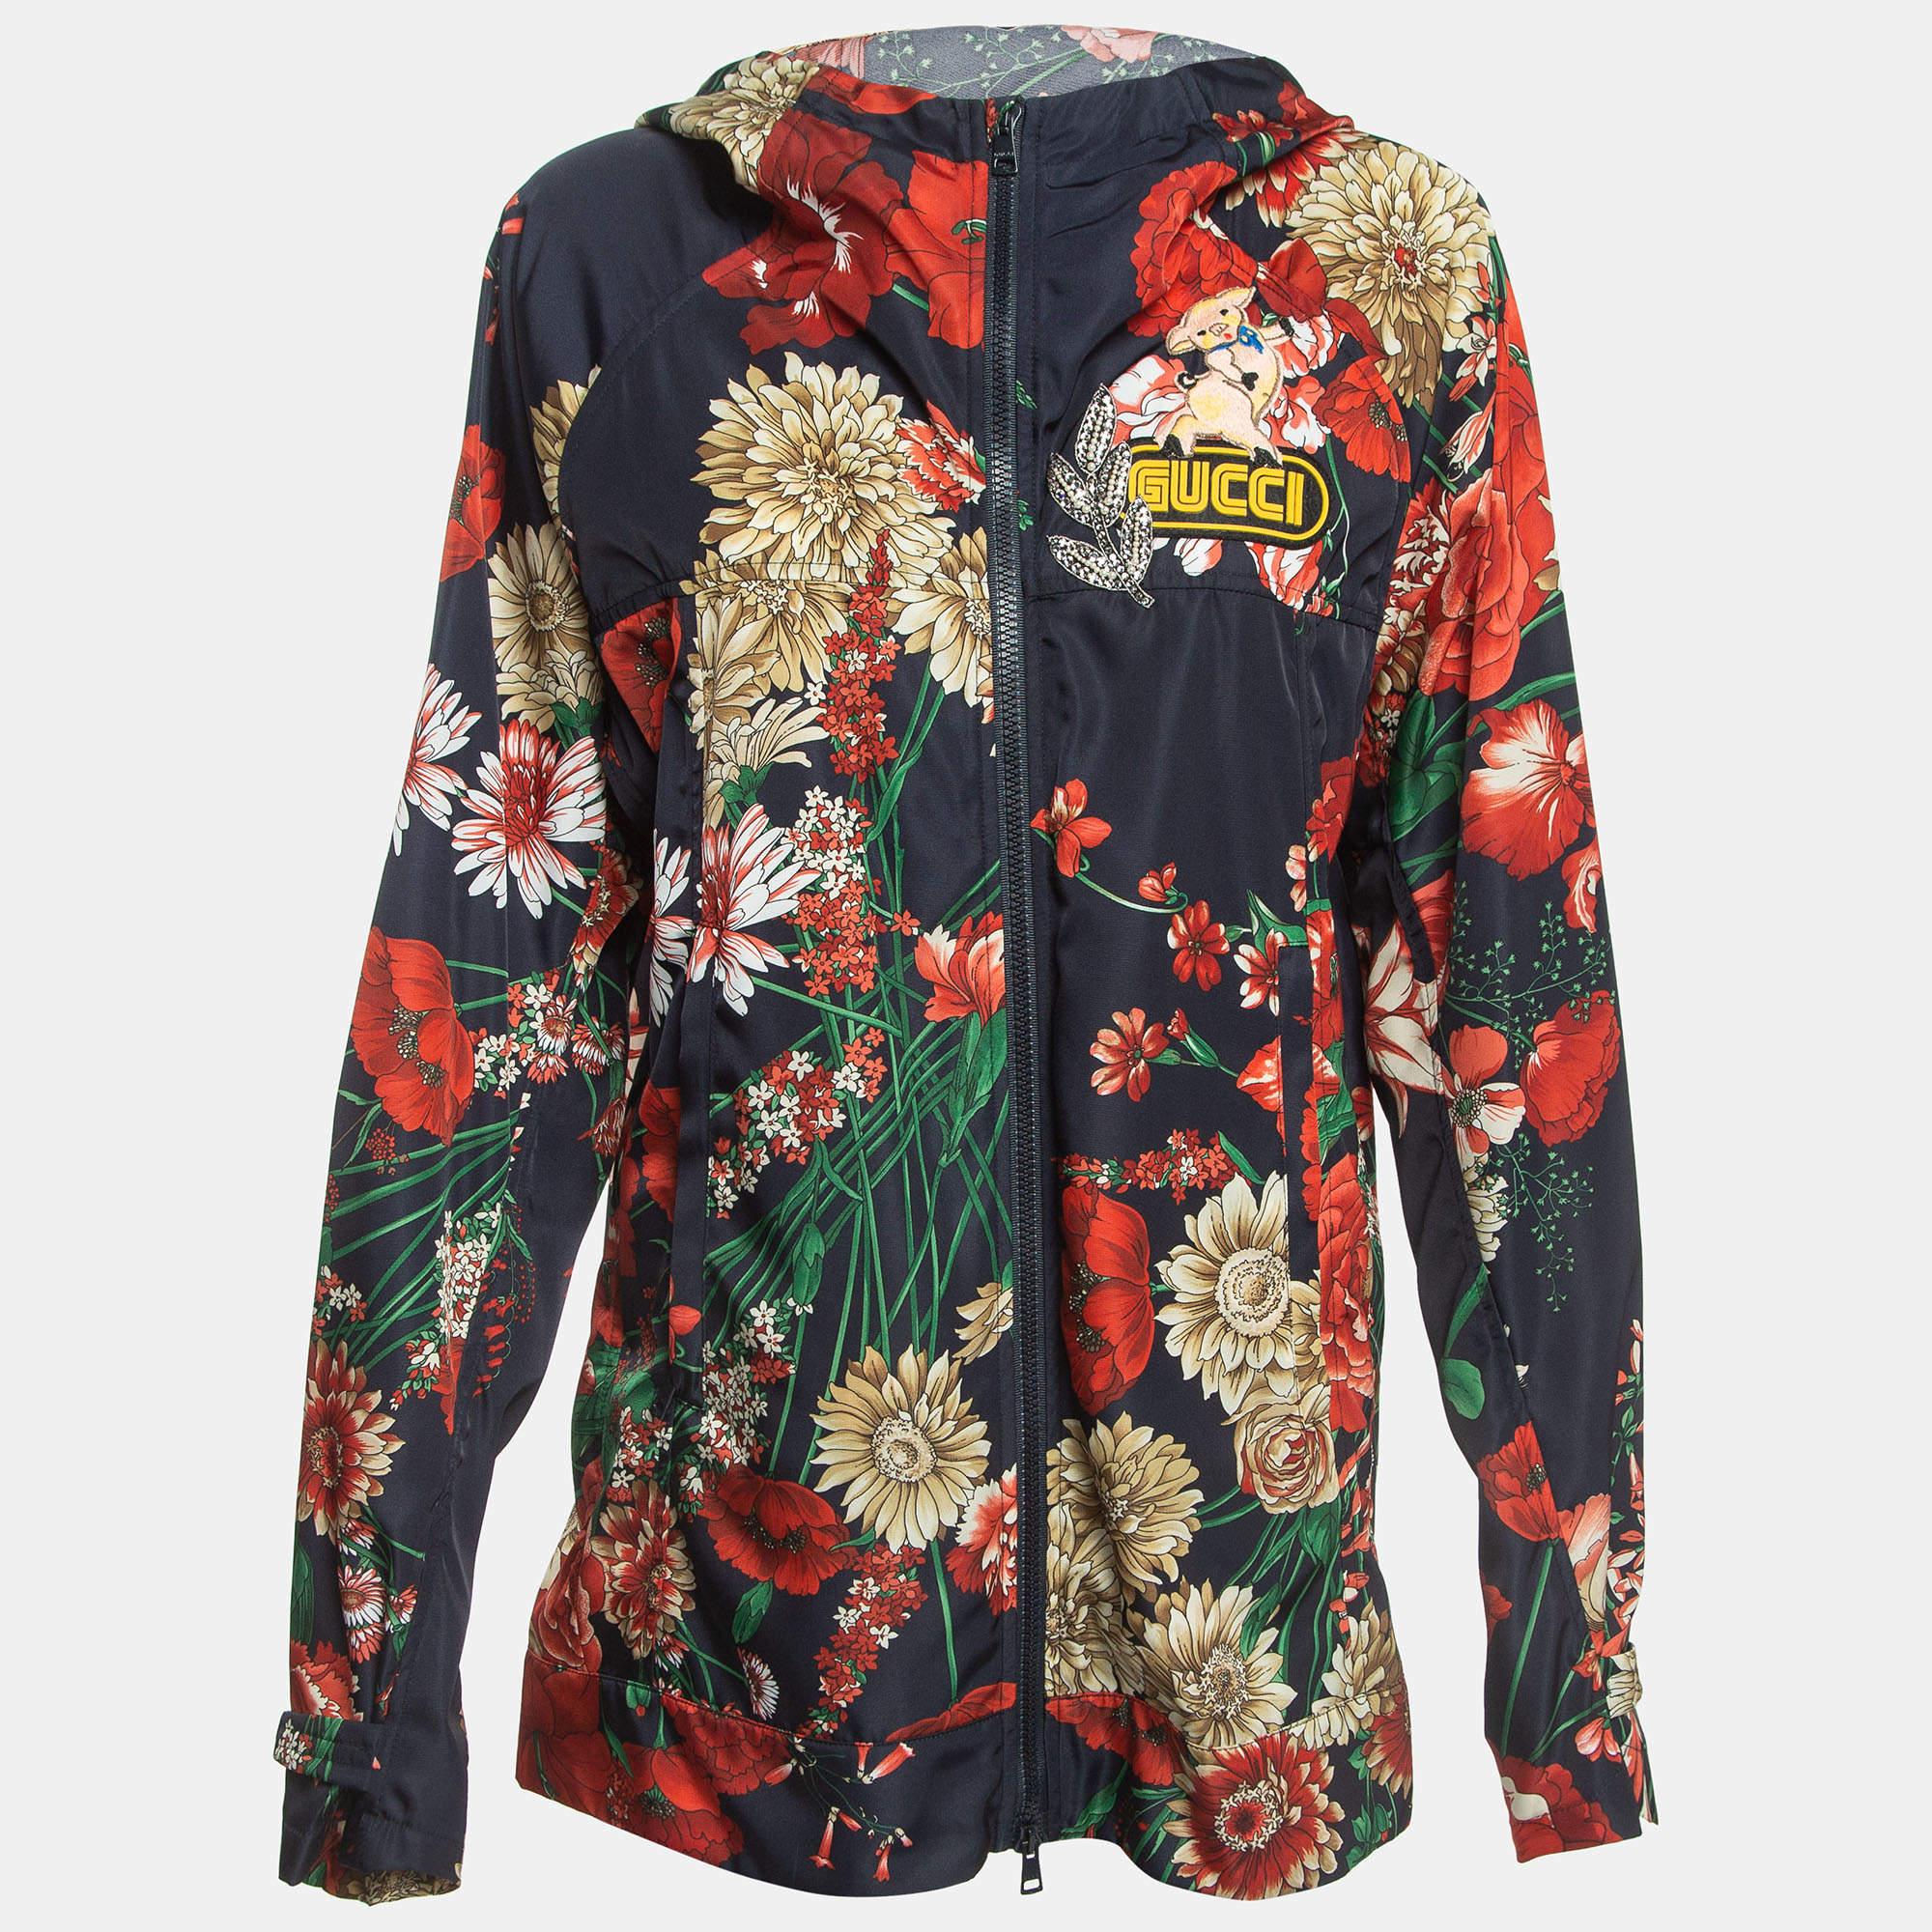 The Gucci jacket is a vibrant and stylish outerwear piece. Crafted from high-quality nylon, it features a striking floral print design with intricate applique detailing, complete with a cozy hood for added comfort and flair.

